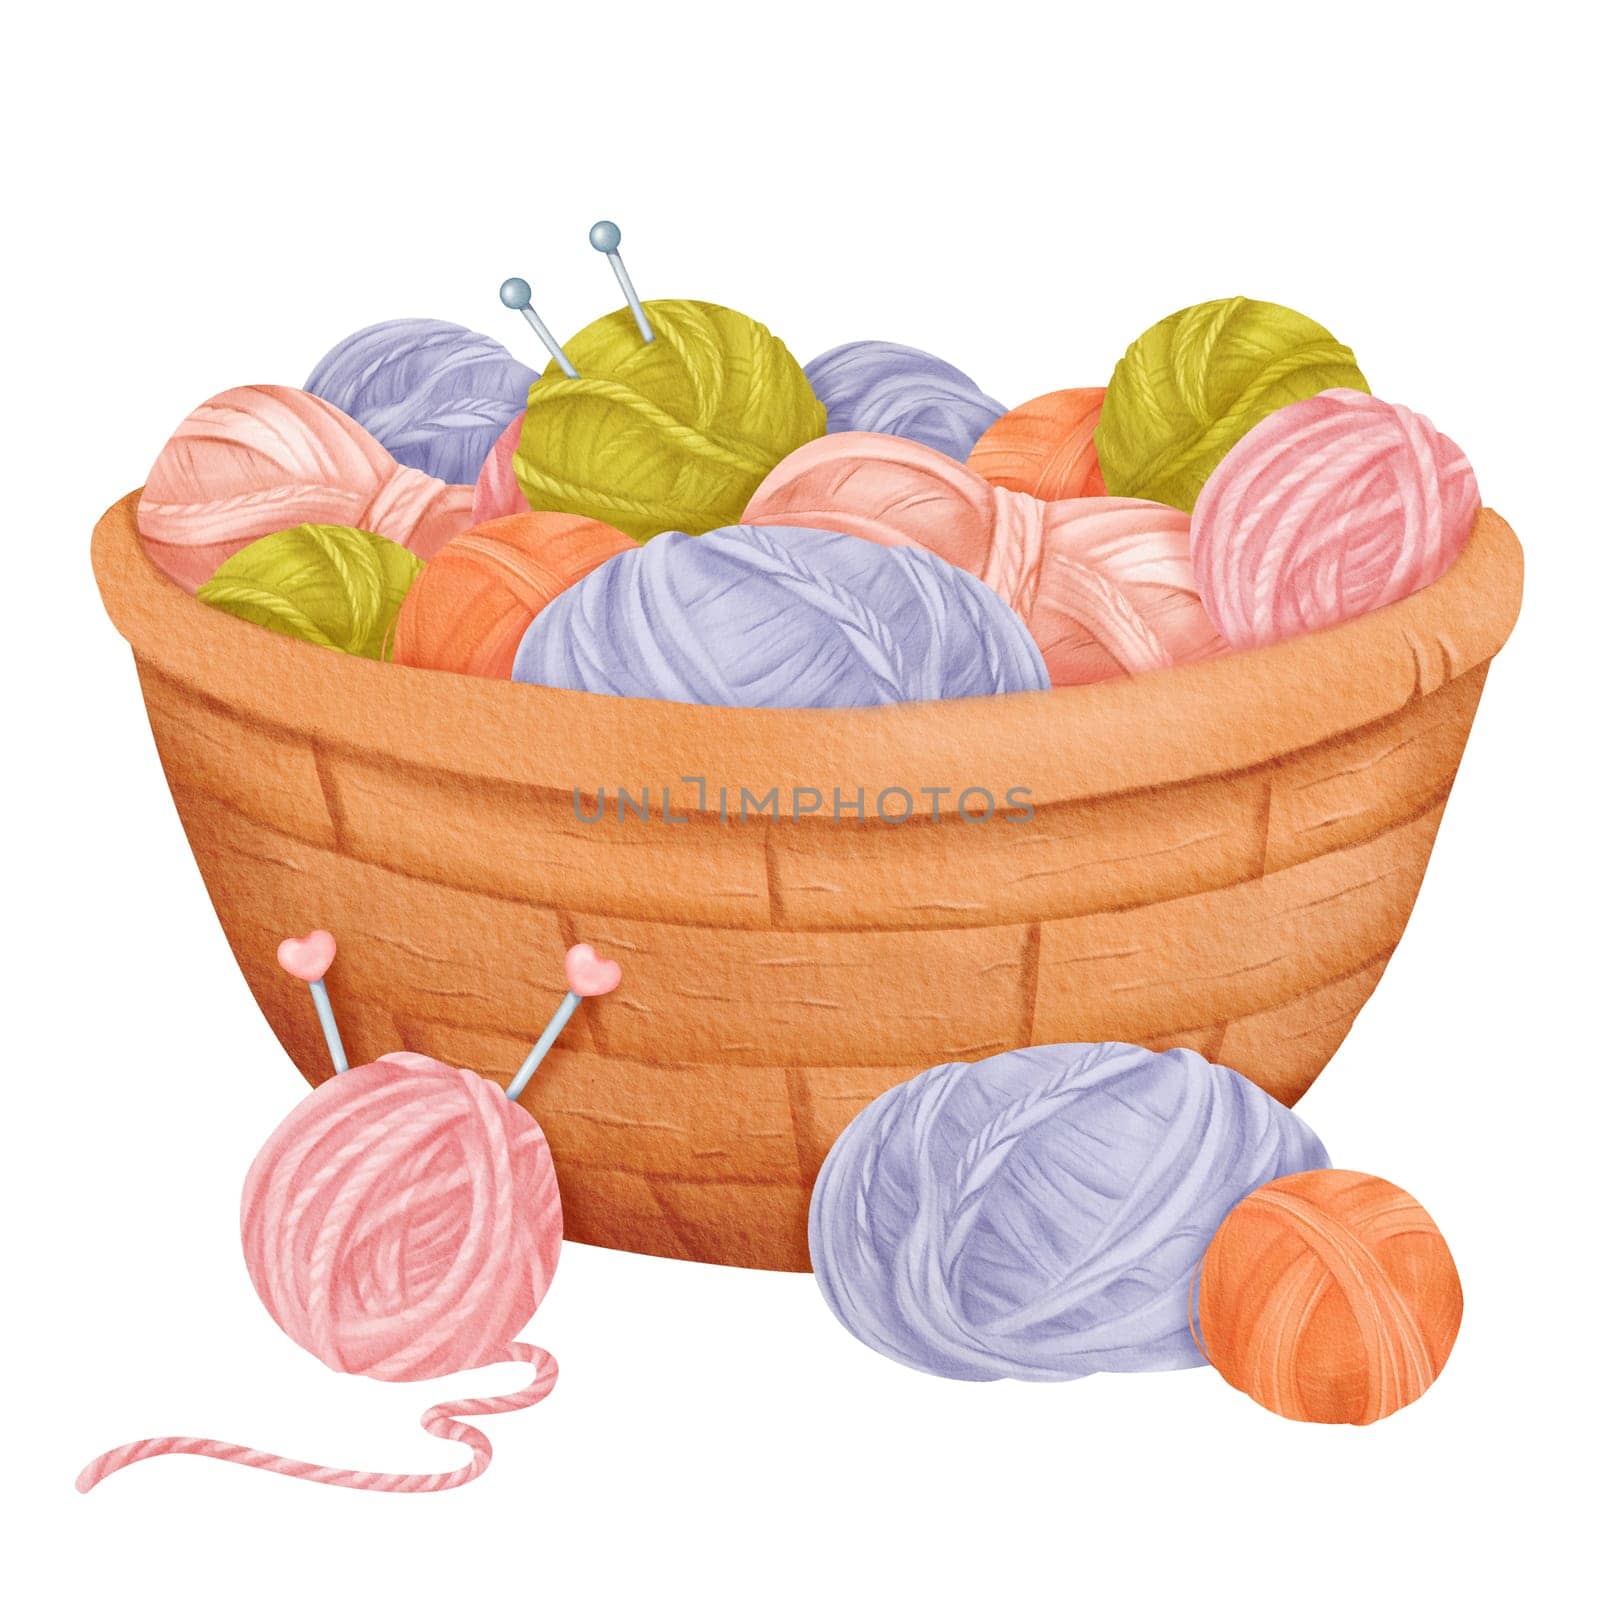 A cozy setup featuring a woven basket filled with assorted yarn balls and knitting needles. Perfect for crafting enthusiasts, knitting tutorials, or DIY-themed designs. Watercolor illustration.